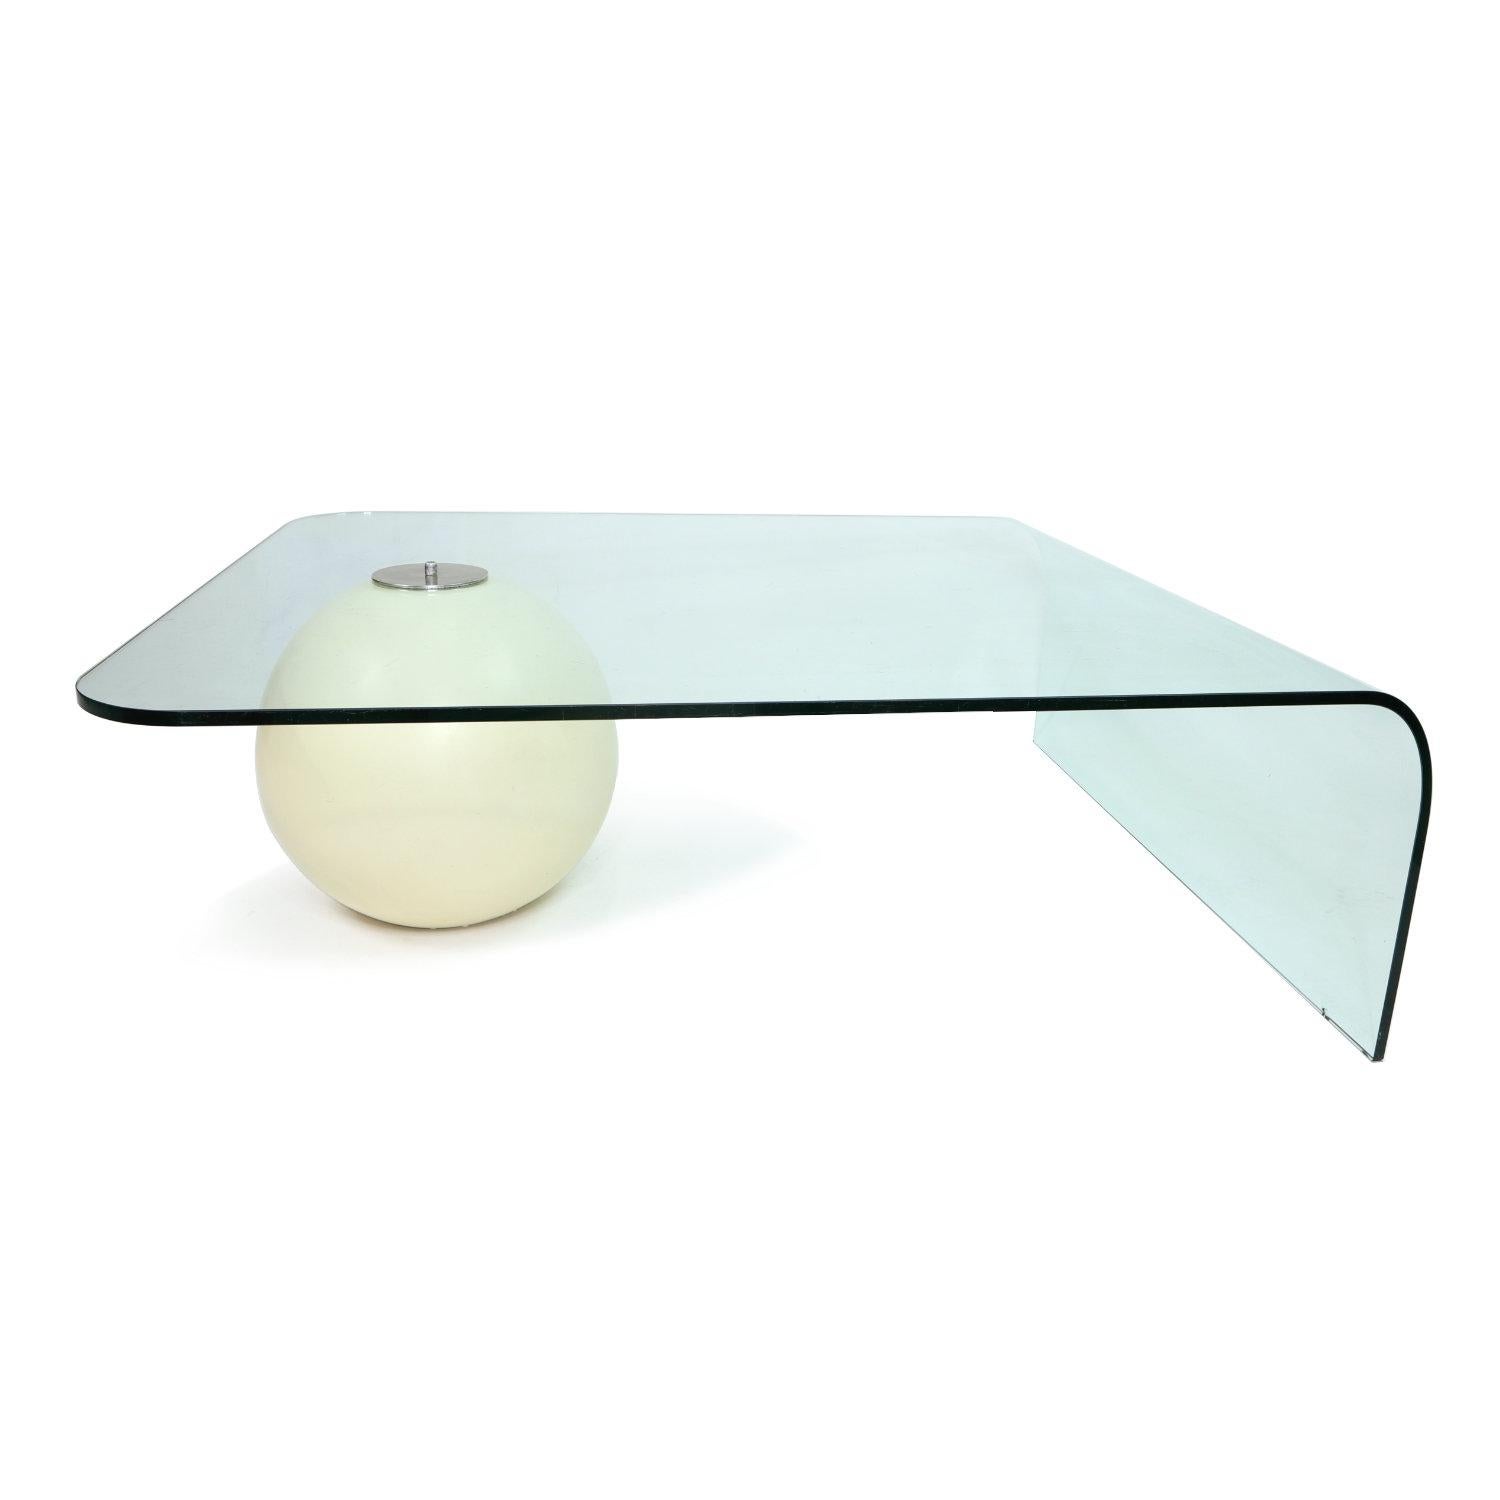 The curved glass coffee table is a functional work of art. The graceful, contoured single glass pane balances on a white ball. The white enamel paint is original, several decades old. It is no longer pure white, but rather a warm “antiqued” white.